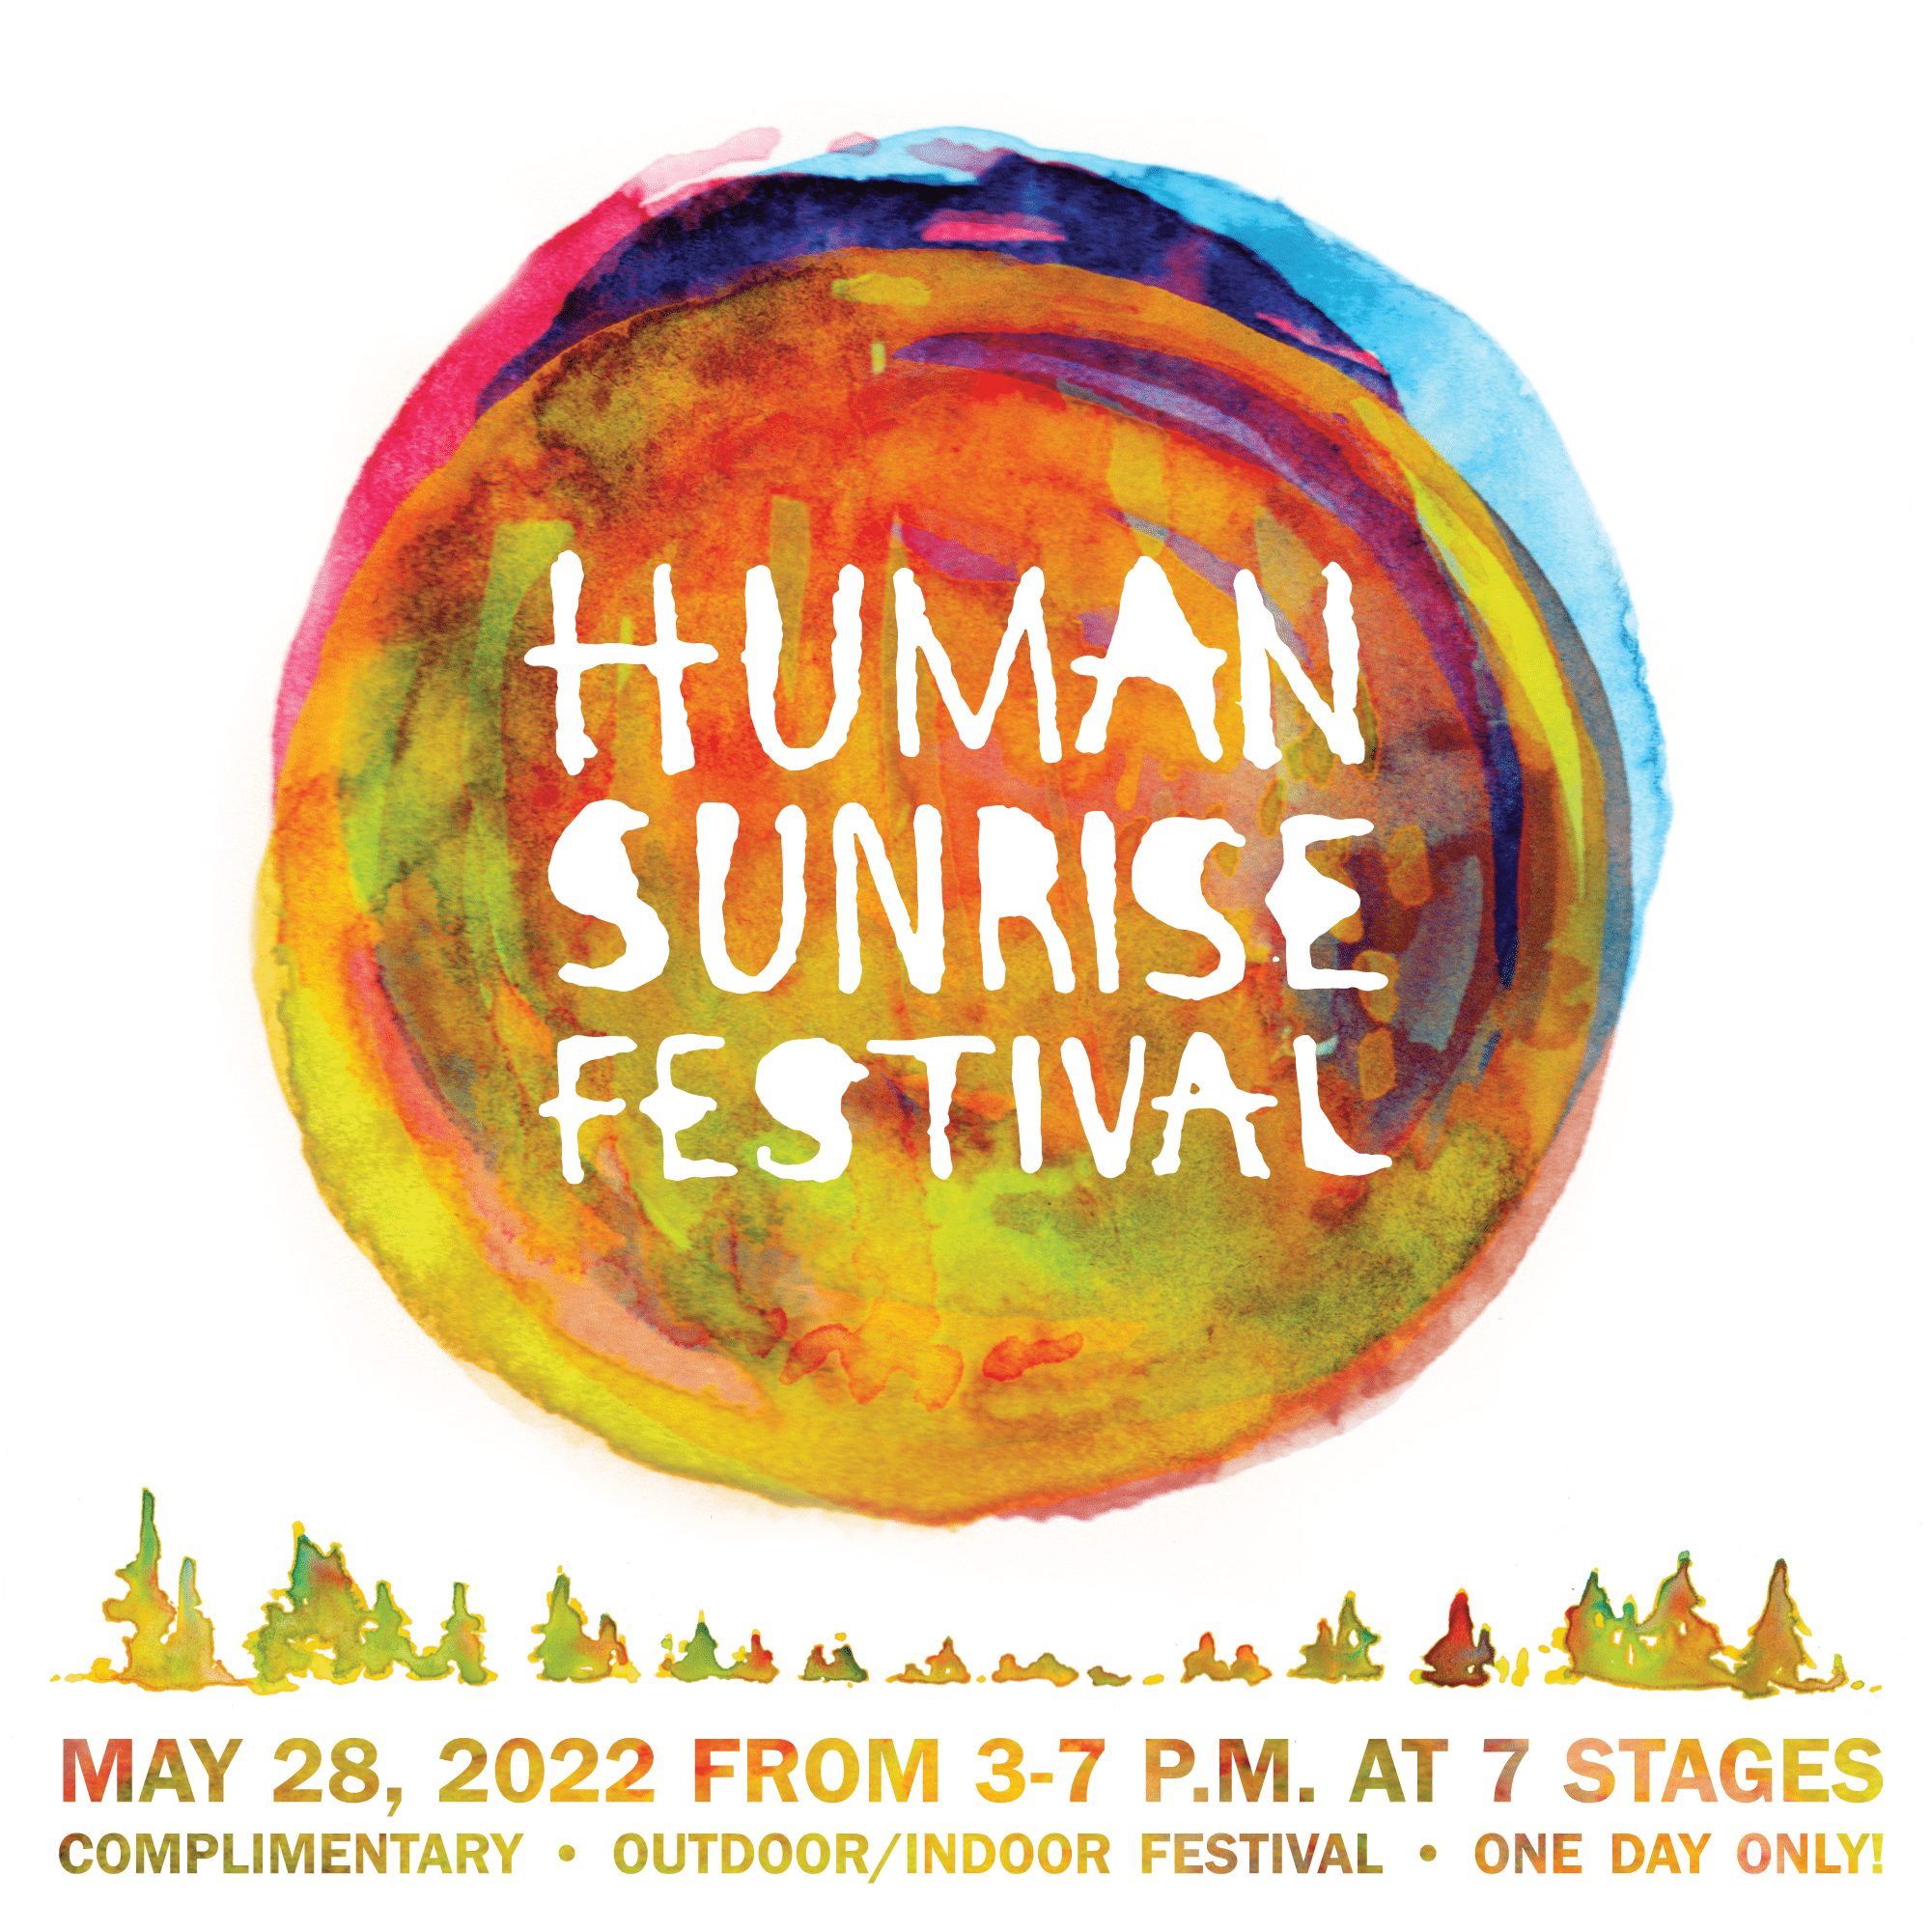 Human Sunrise Festival. May 28, 2022 from 3 to 7 p.m. at 7 Stages. Complimentary outdoor and indoor festival for one day only!